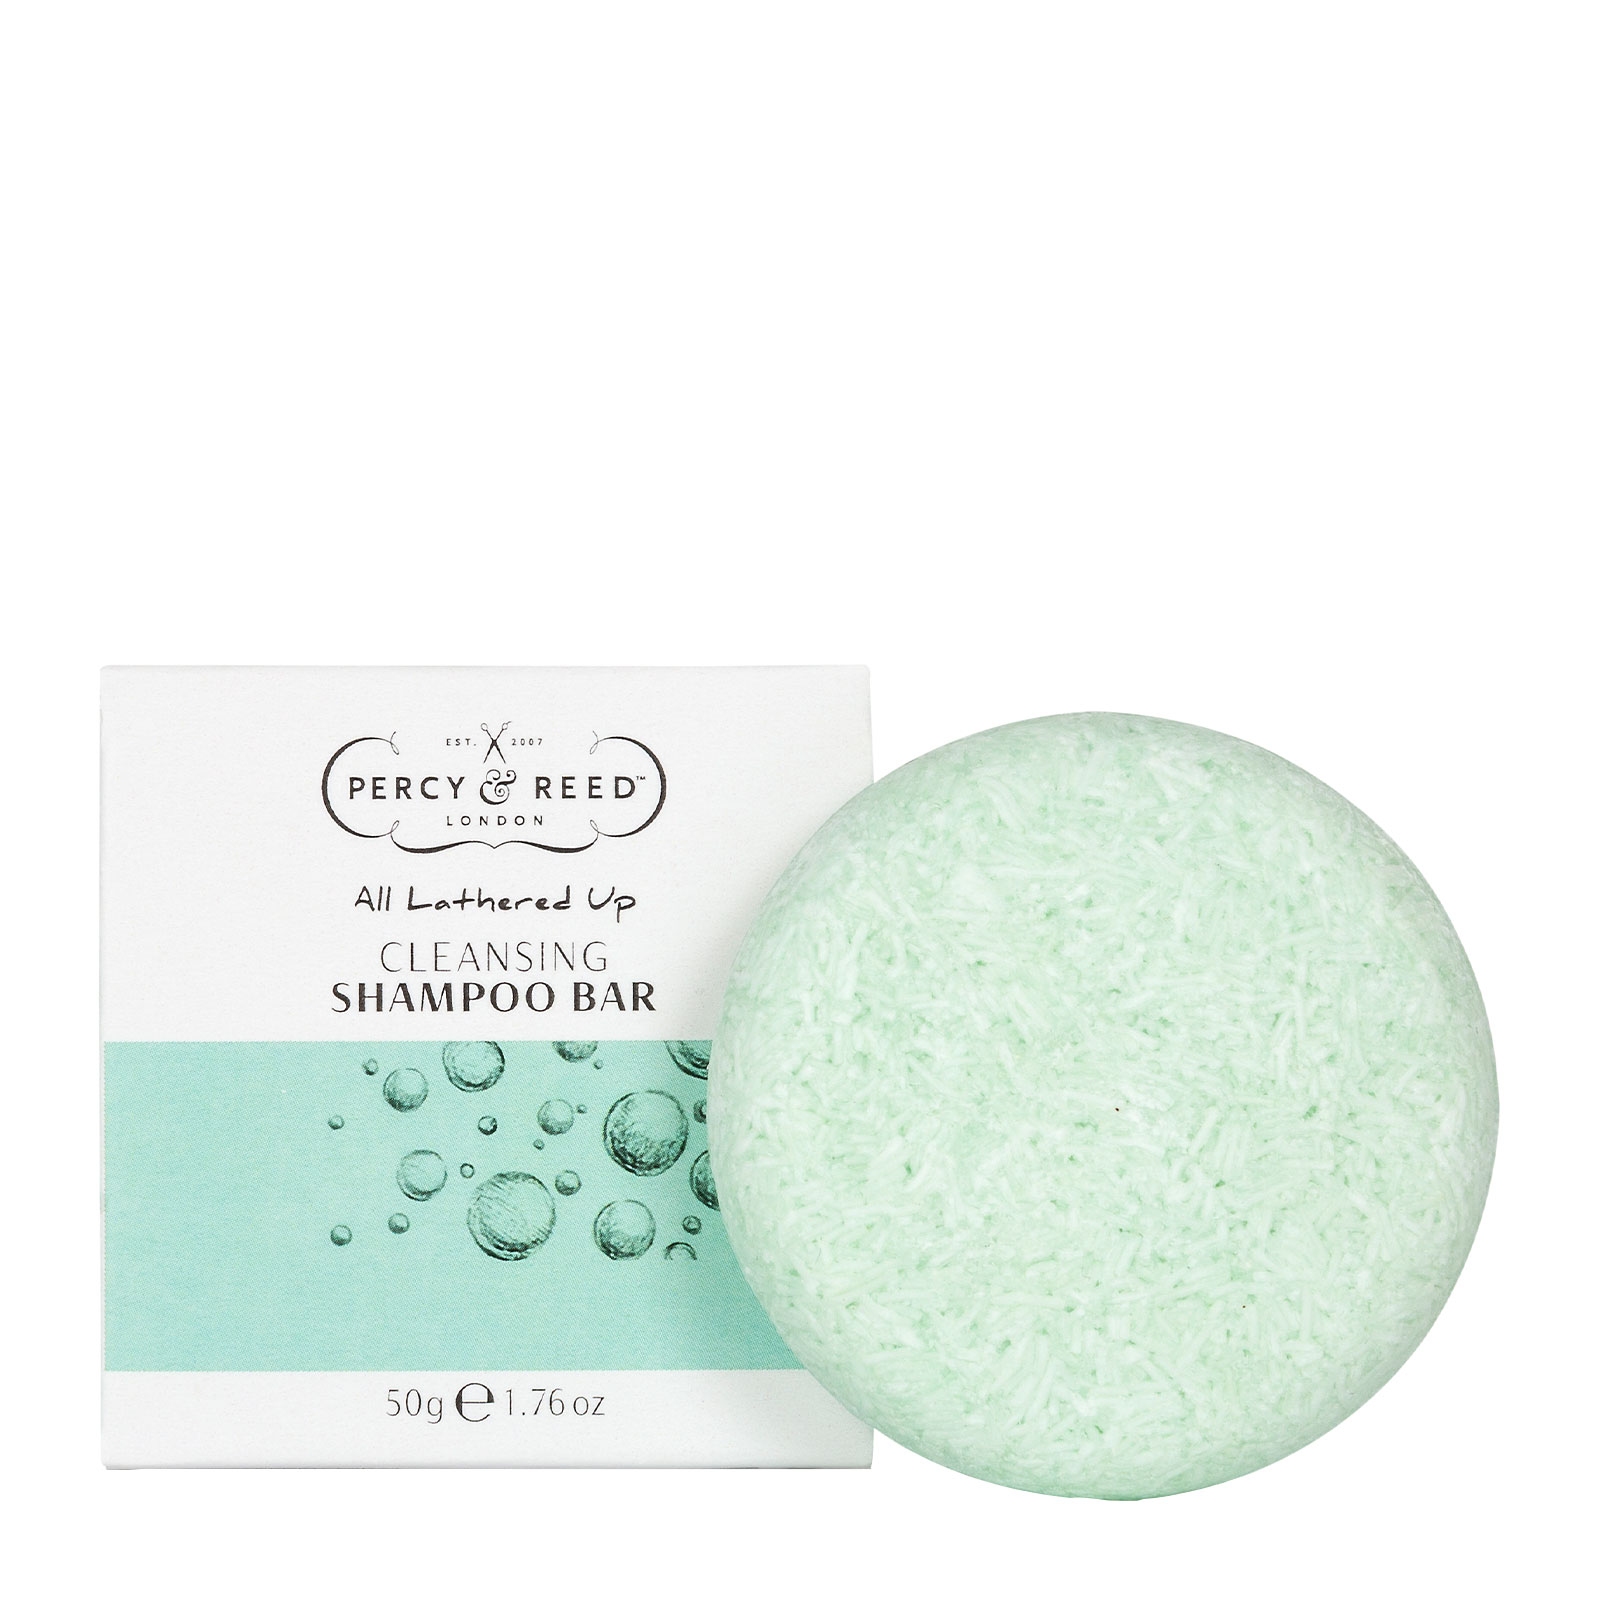 Percy & Reed All Lathered Up Cleansing Shampoo Bar 50G